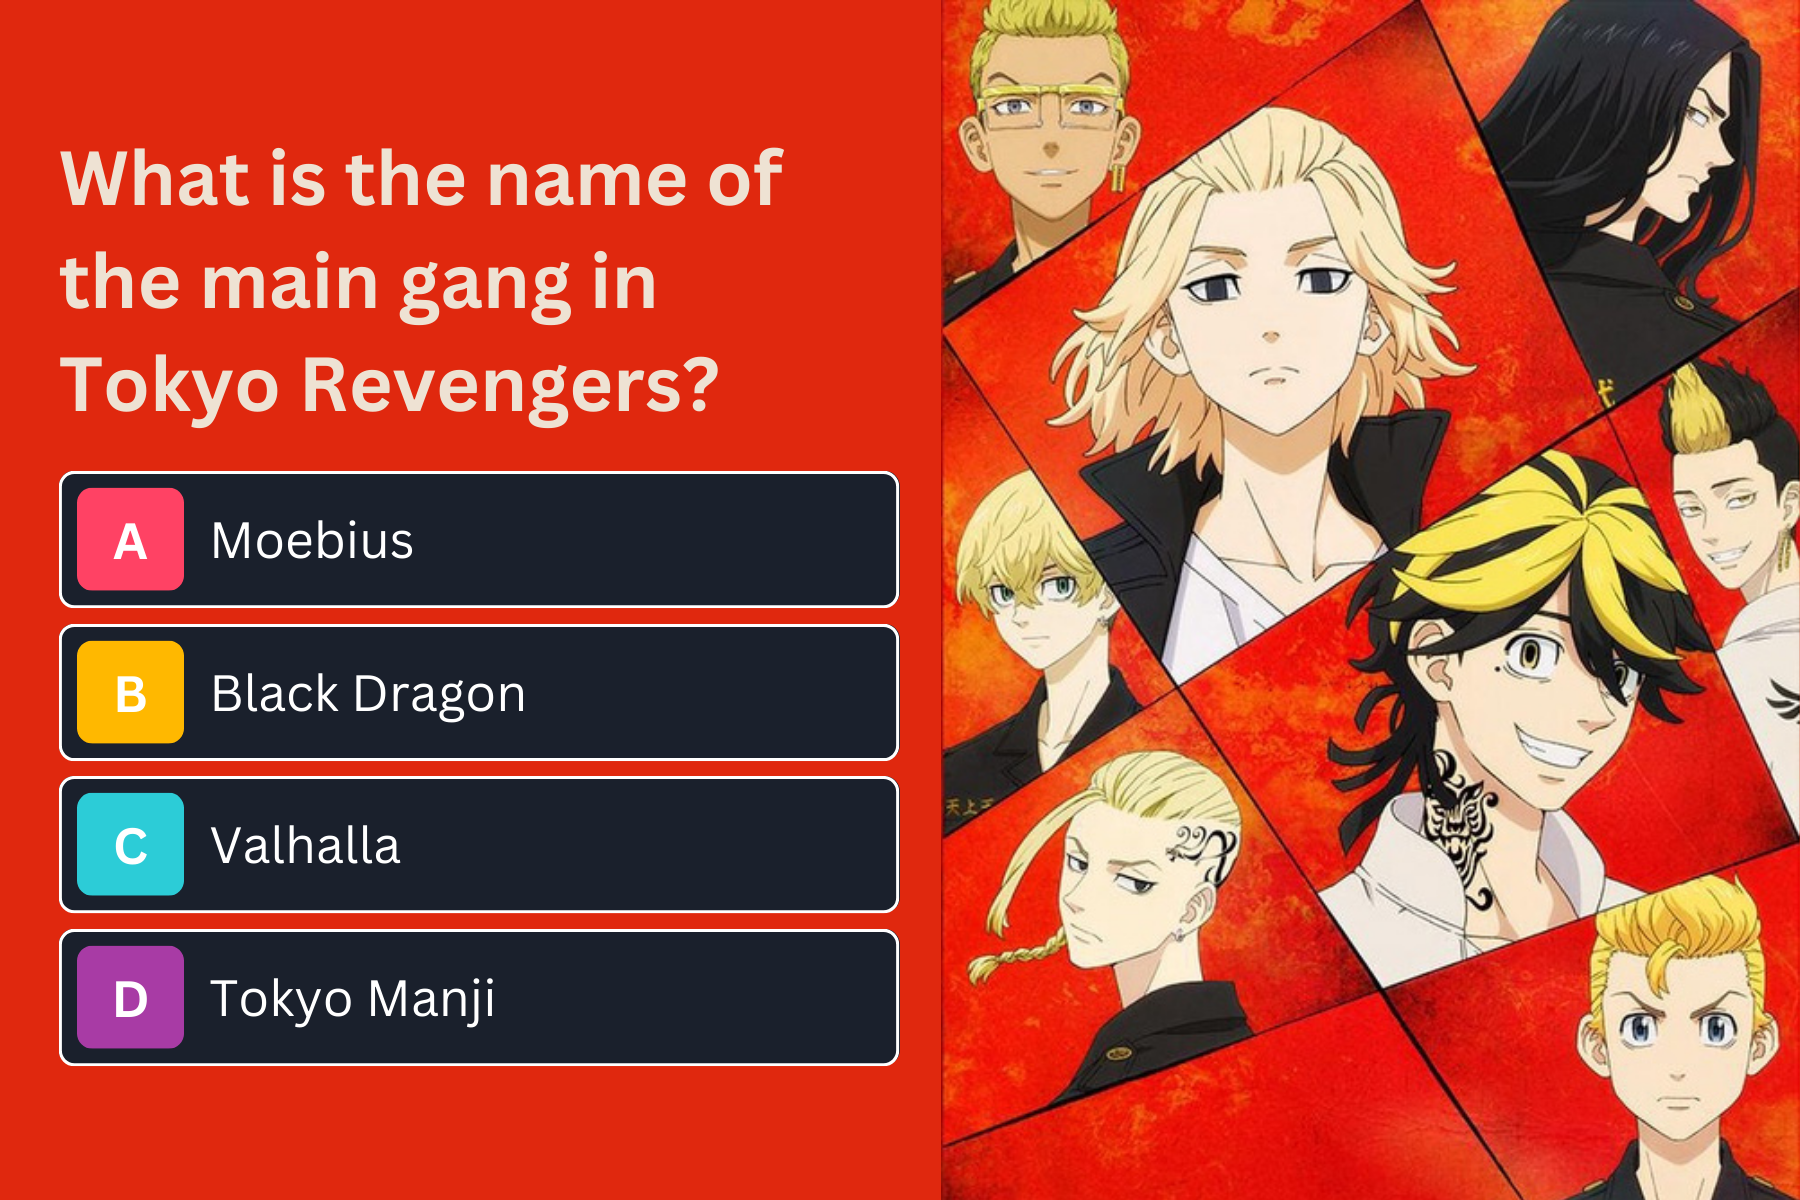 9 Quizzes That'll Test Your Anime Knowledge